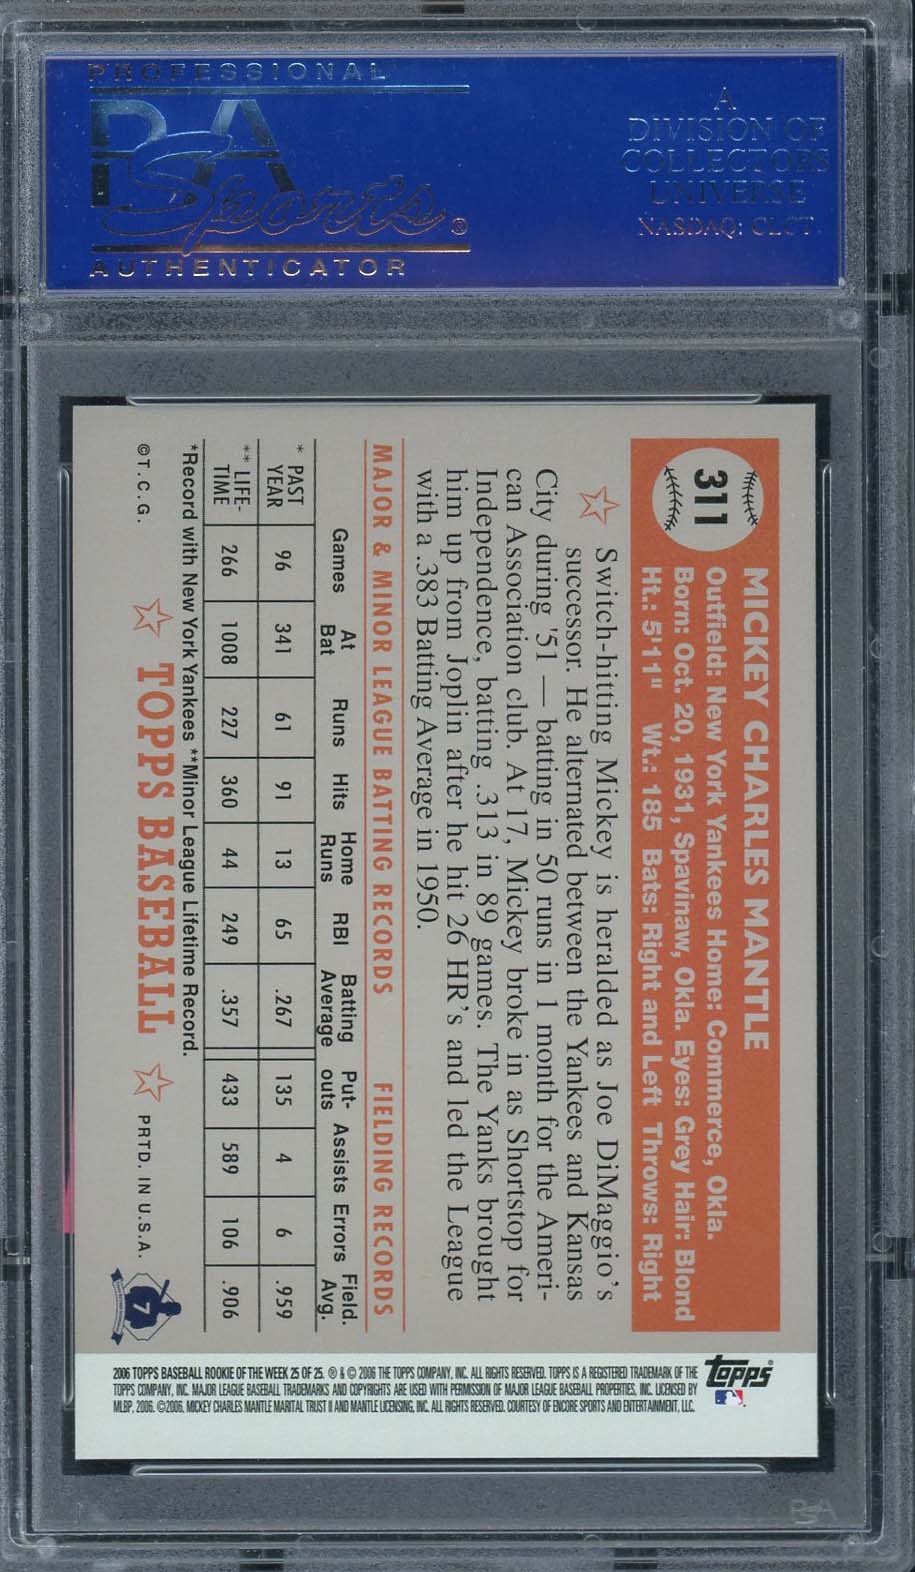 Mickey Mantle 2006 Topps All Time Rookie of the Week Baseball Card #25 Graded PSA 10 GEM MINT-Powers Sports Memorabilia